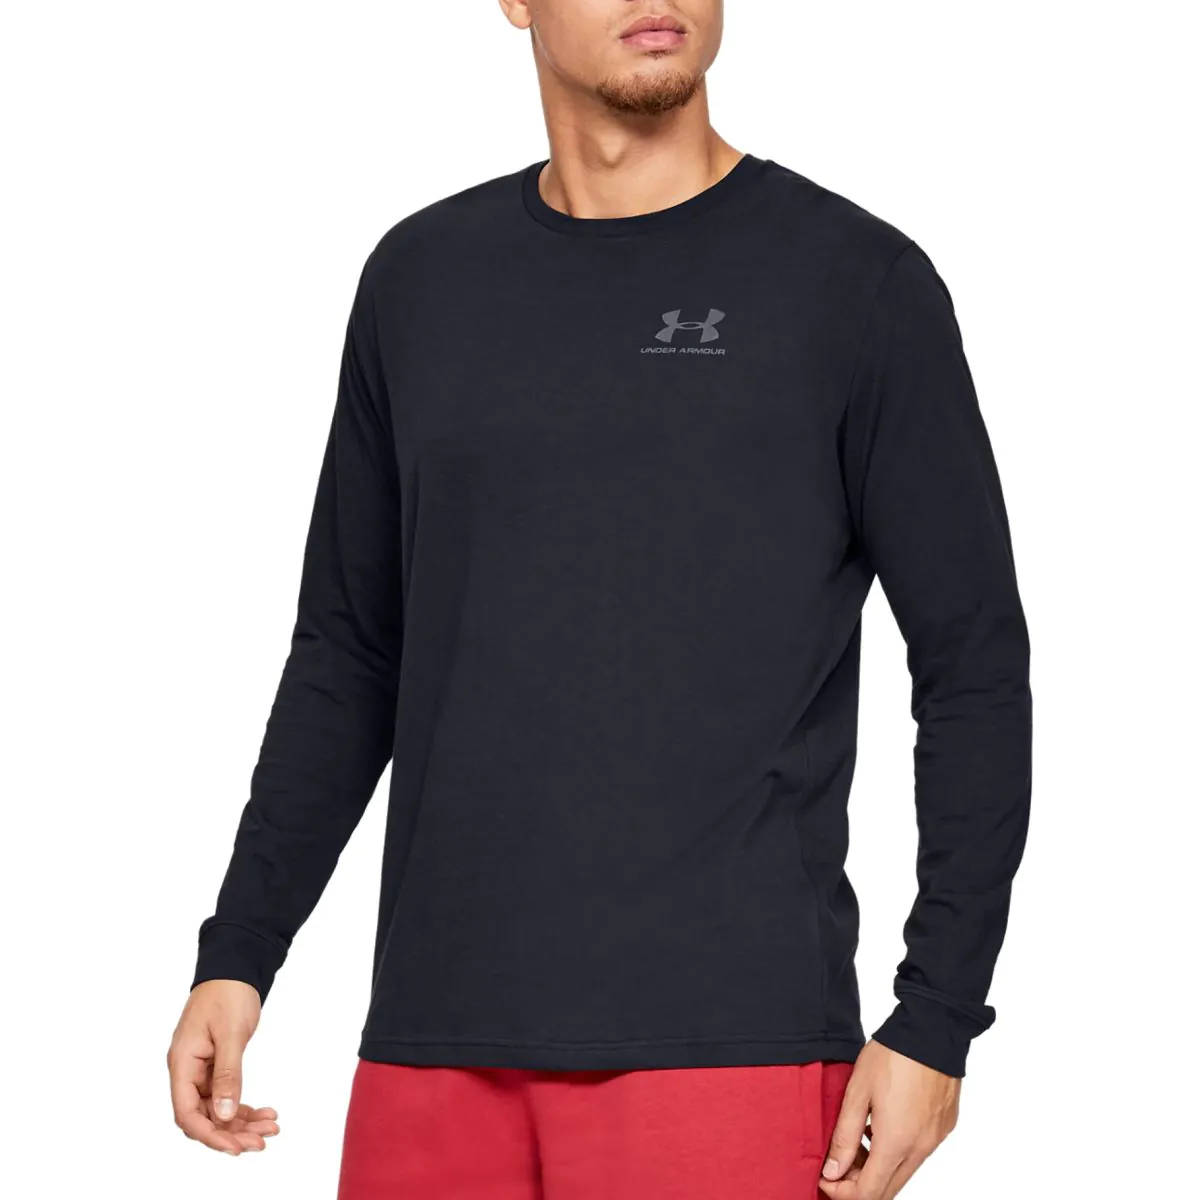 Under Armour Sportstyle Left Chest Long Sleeve Men's Top 132